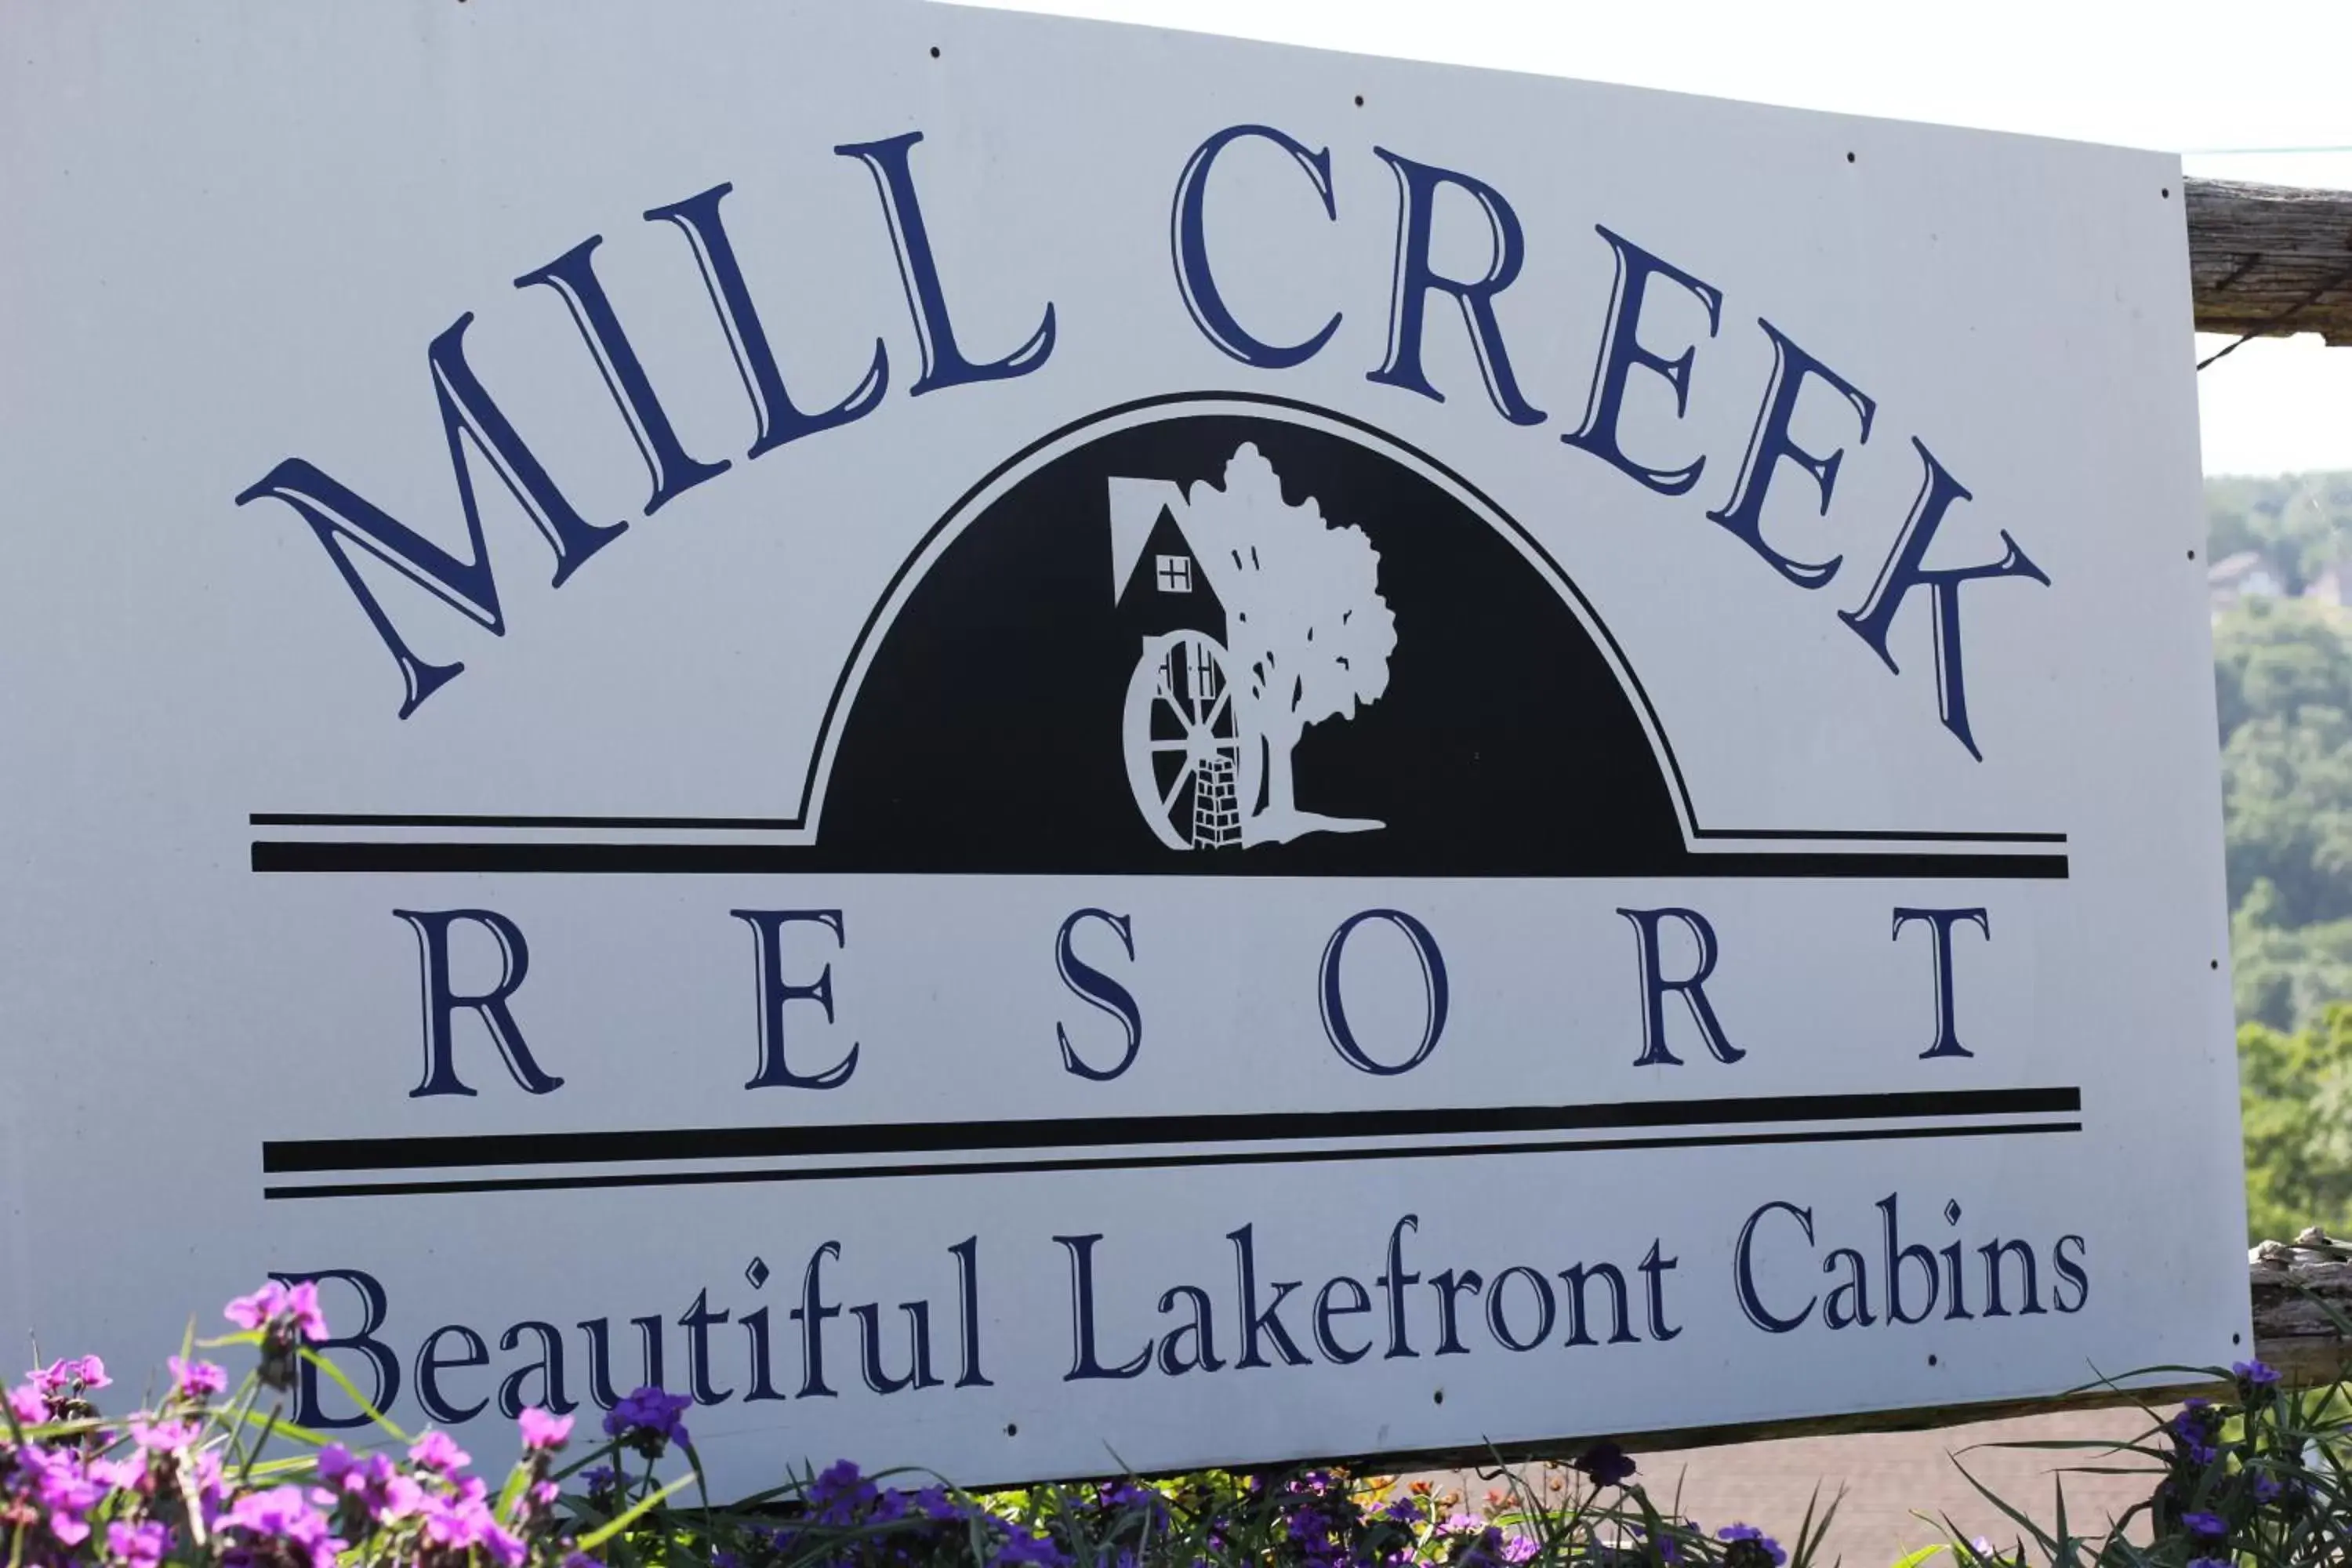 Property logo or sign, Property Logo/Sign in Mill Creek Resort on Table Rock Lake